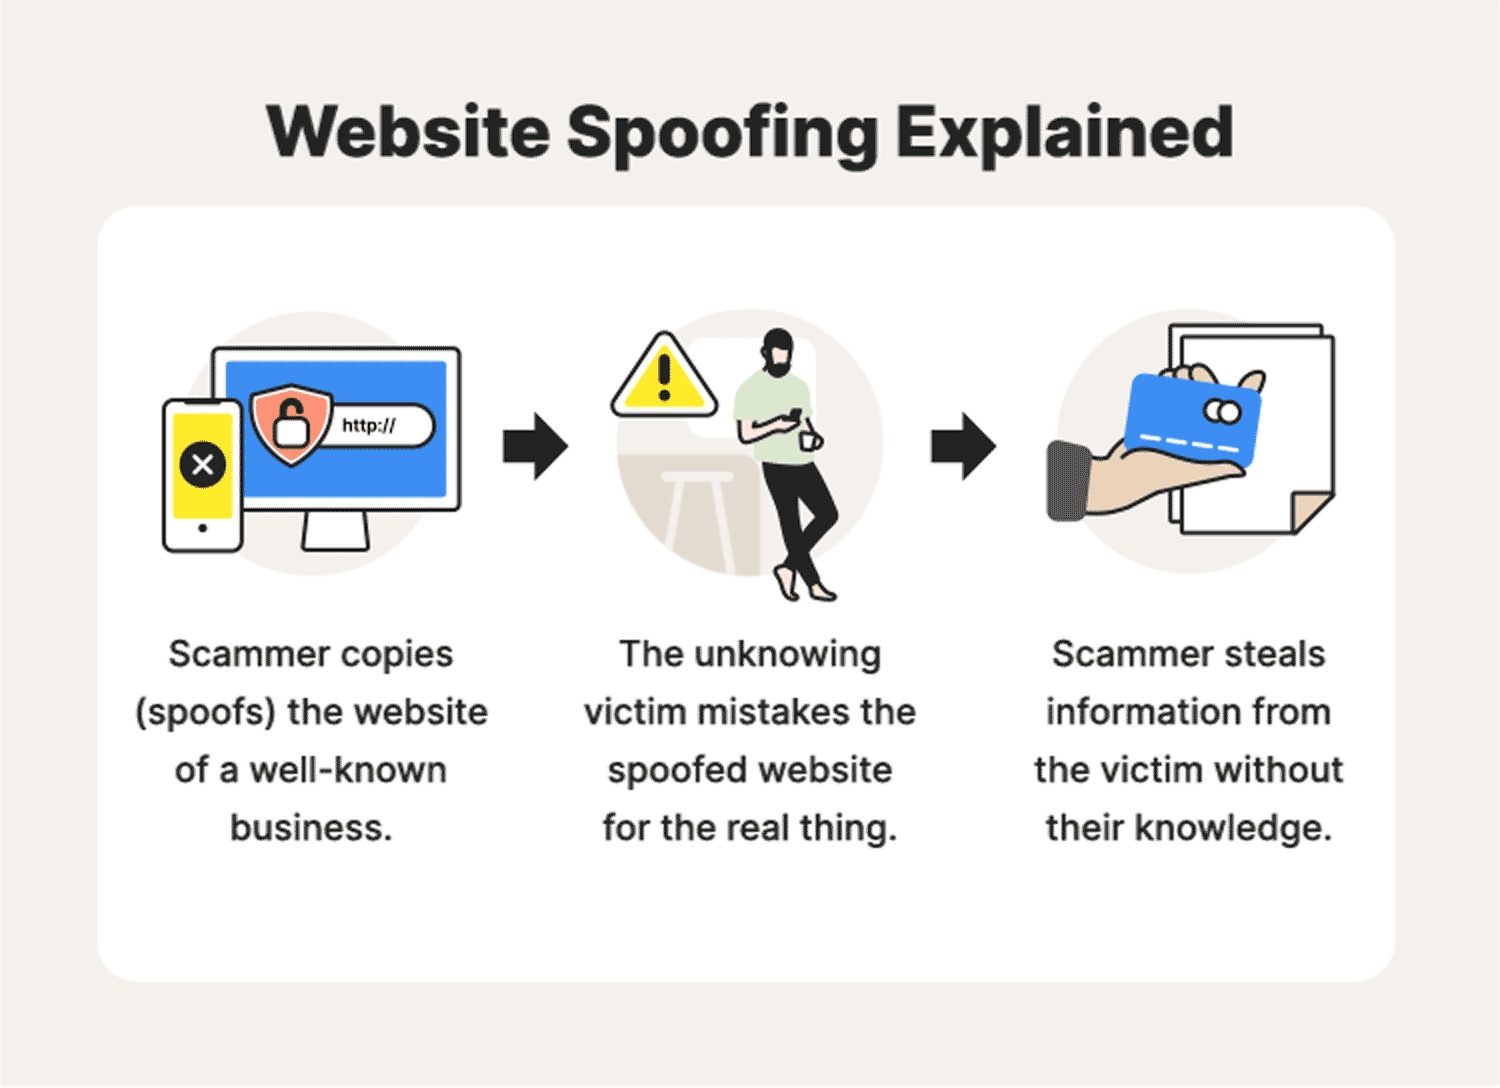 Three illustrations support and explanation of key steps in the website spoofing process.